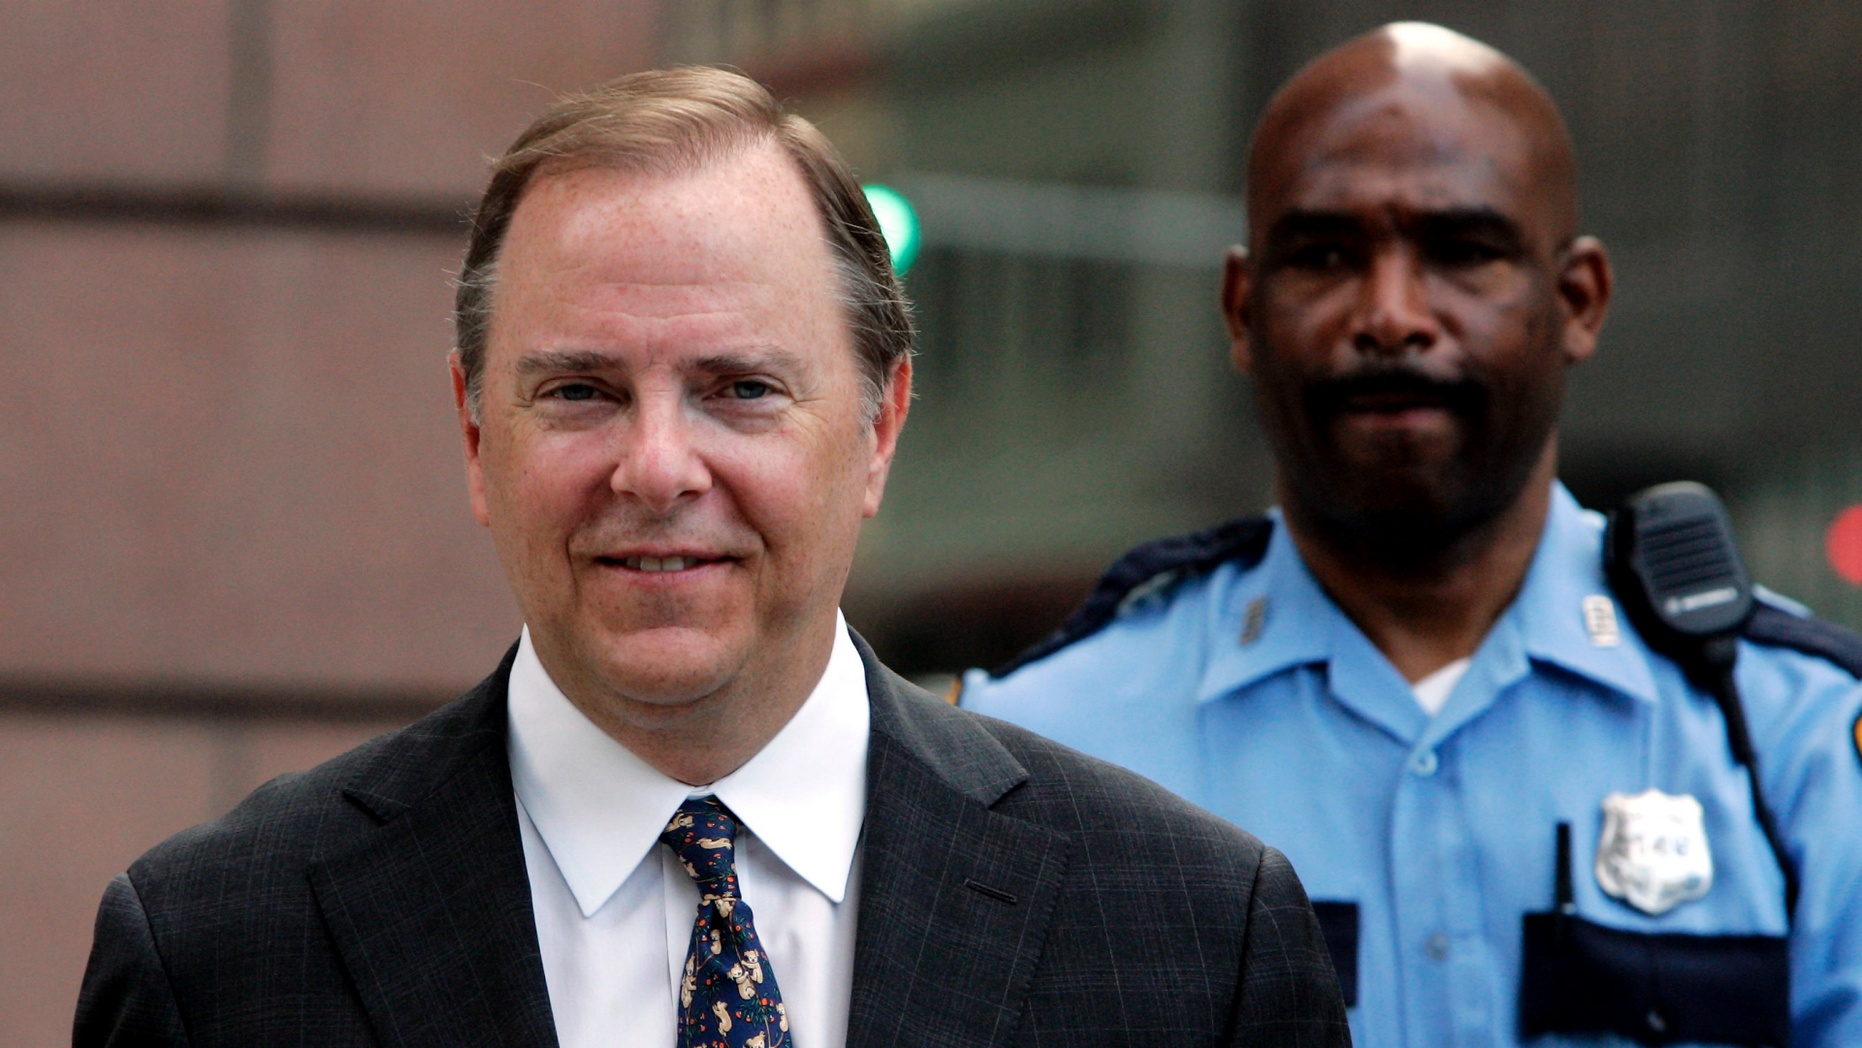 FEATURE - On this photo from Monday, April 17, 2006, former Enron executive Jeffrey Skilling is escorted to federal court for his first day of cross-examination in his fraud and conspiracy trial in Houston. Jeffrey Skilling, CEO of Ormer Enron Corp., was released on Thursday, Feb. 21, 2019. He is released after 12 years in prison and six months in a halfway house for his actions that led to the death. one of the worst collapses of societies. in the story. (AP Photo / Pat Sullivan, File)